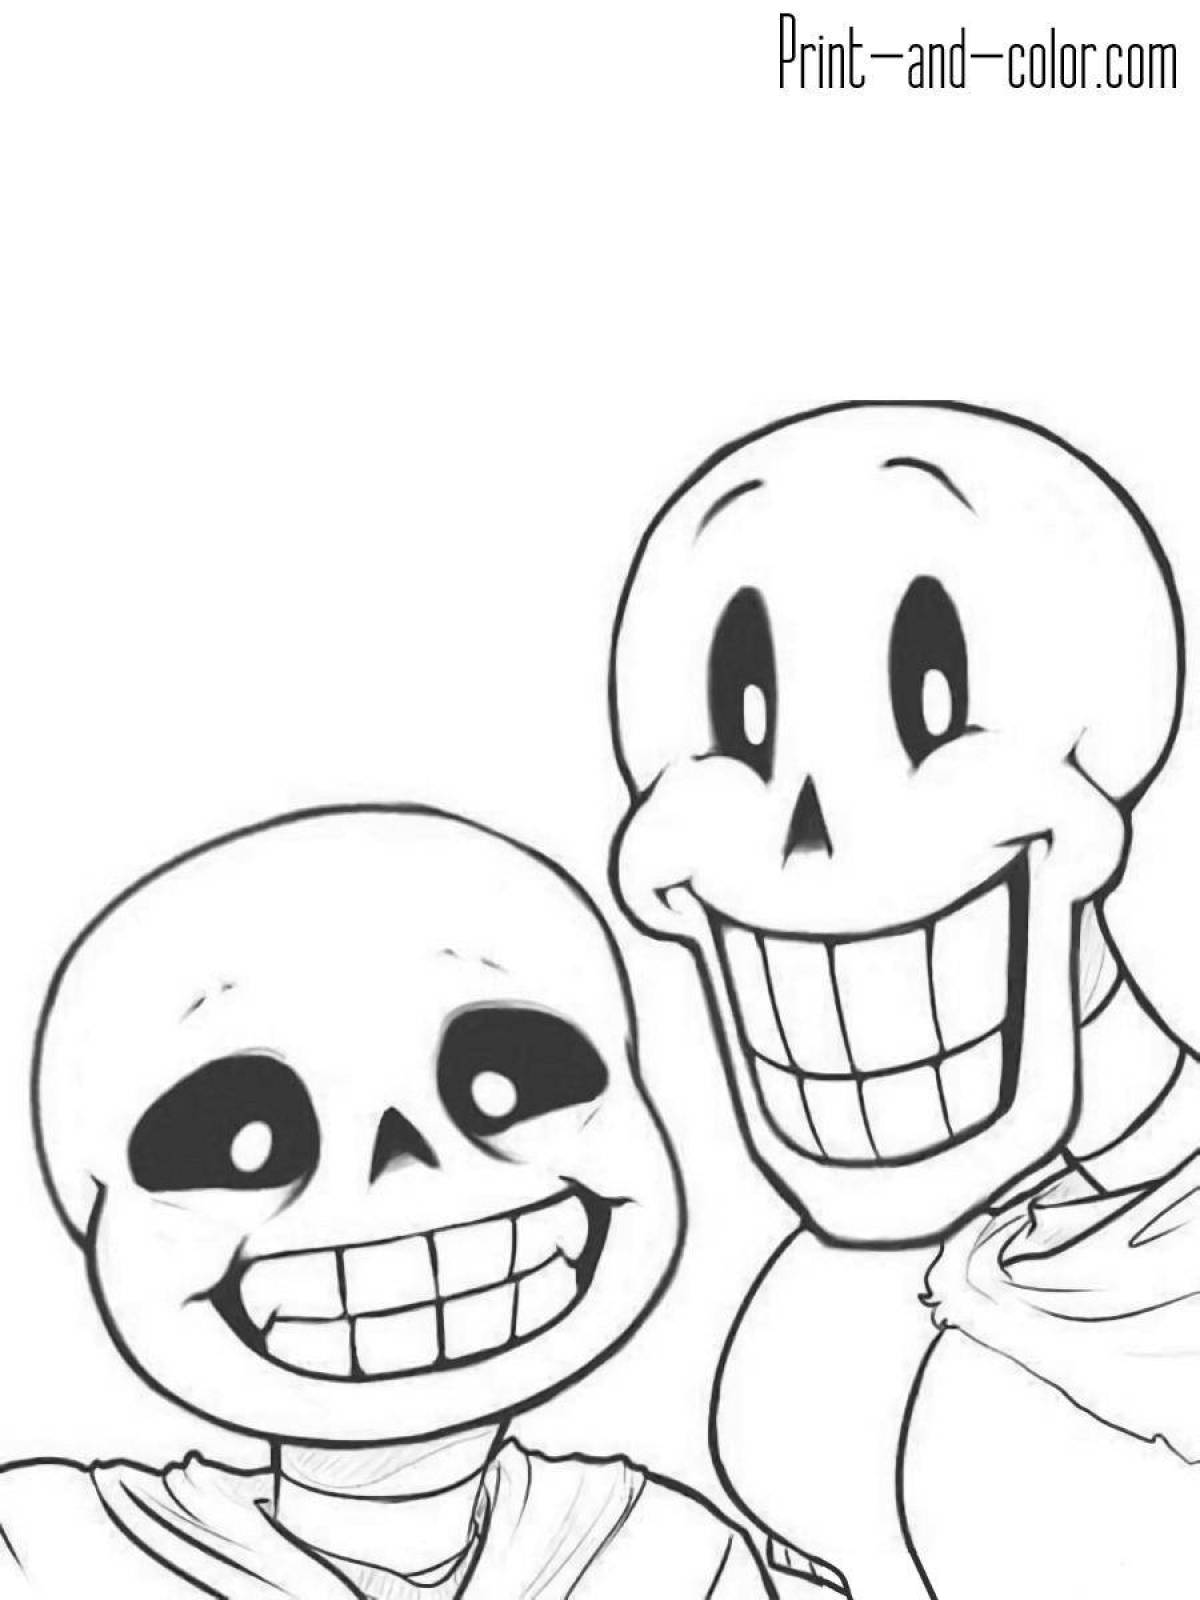 Grand papyrus and sans coloring book